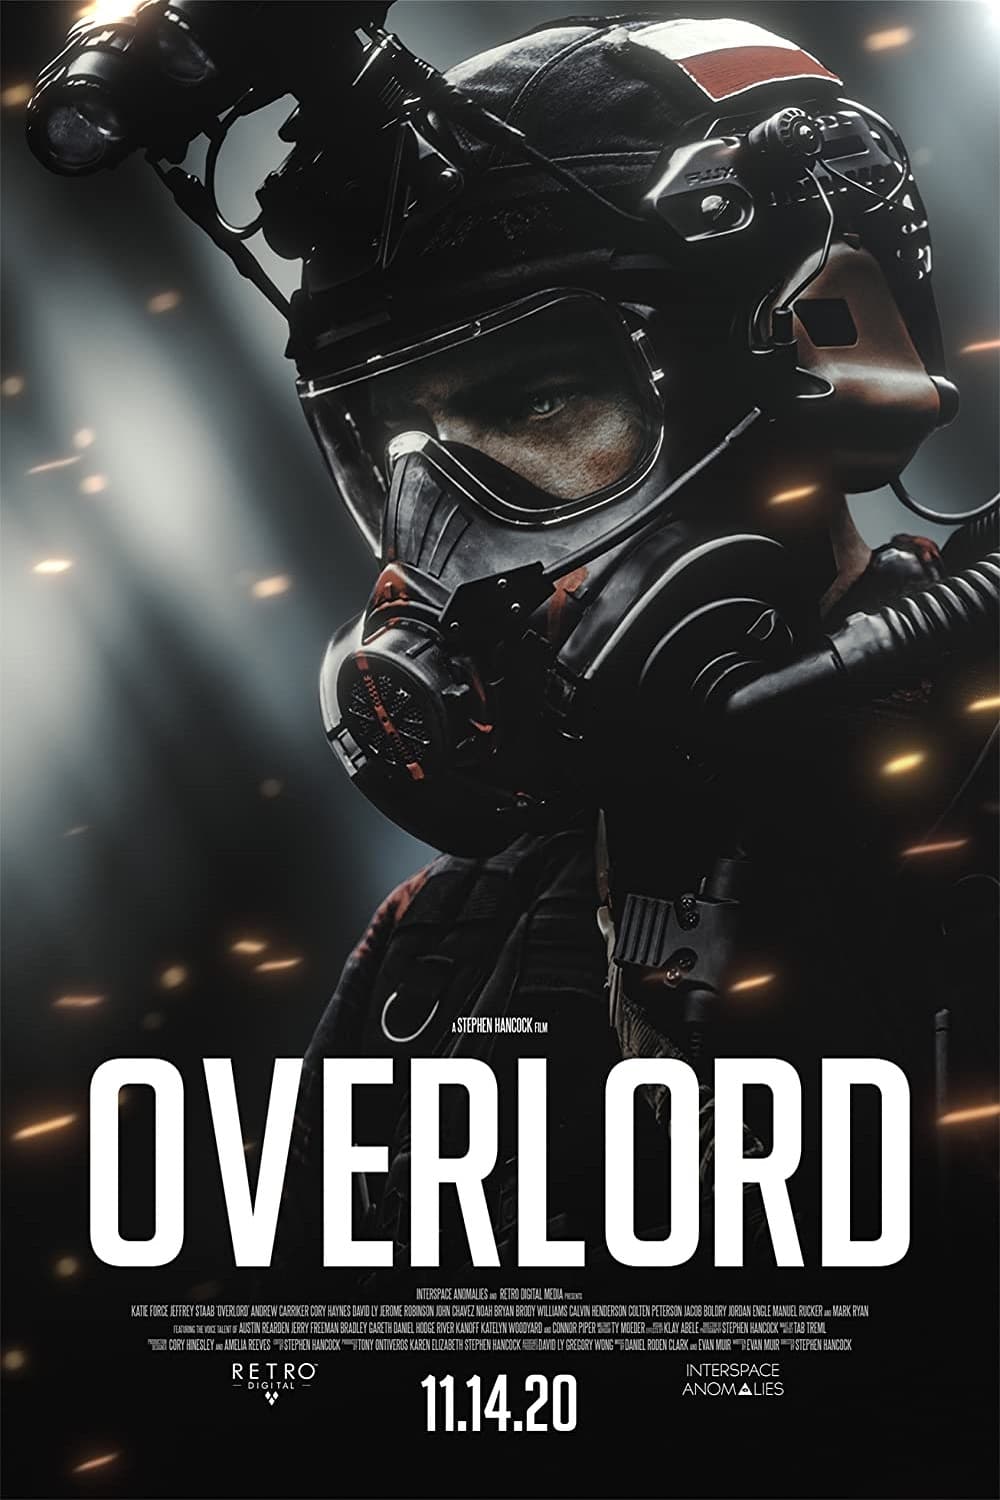 SCP: Overlord